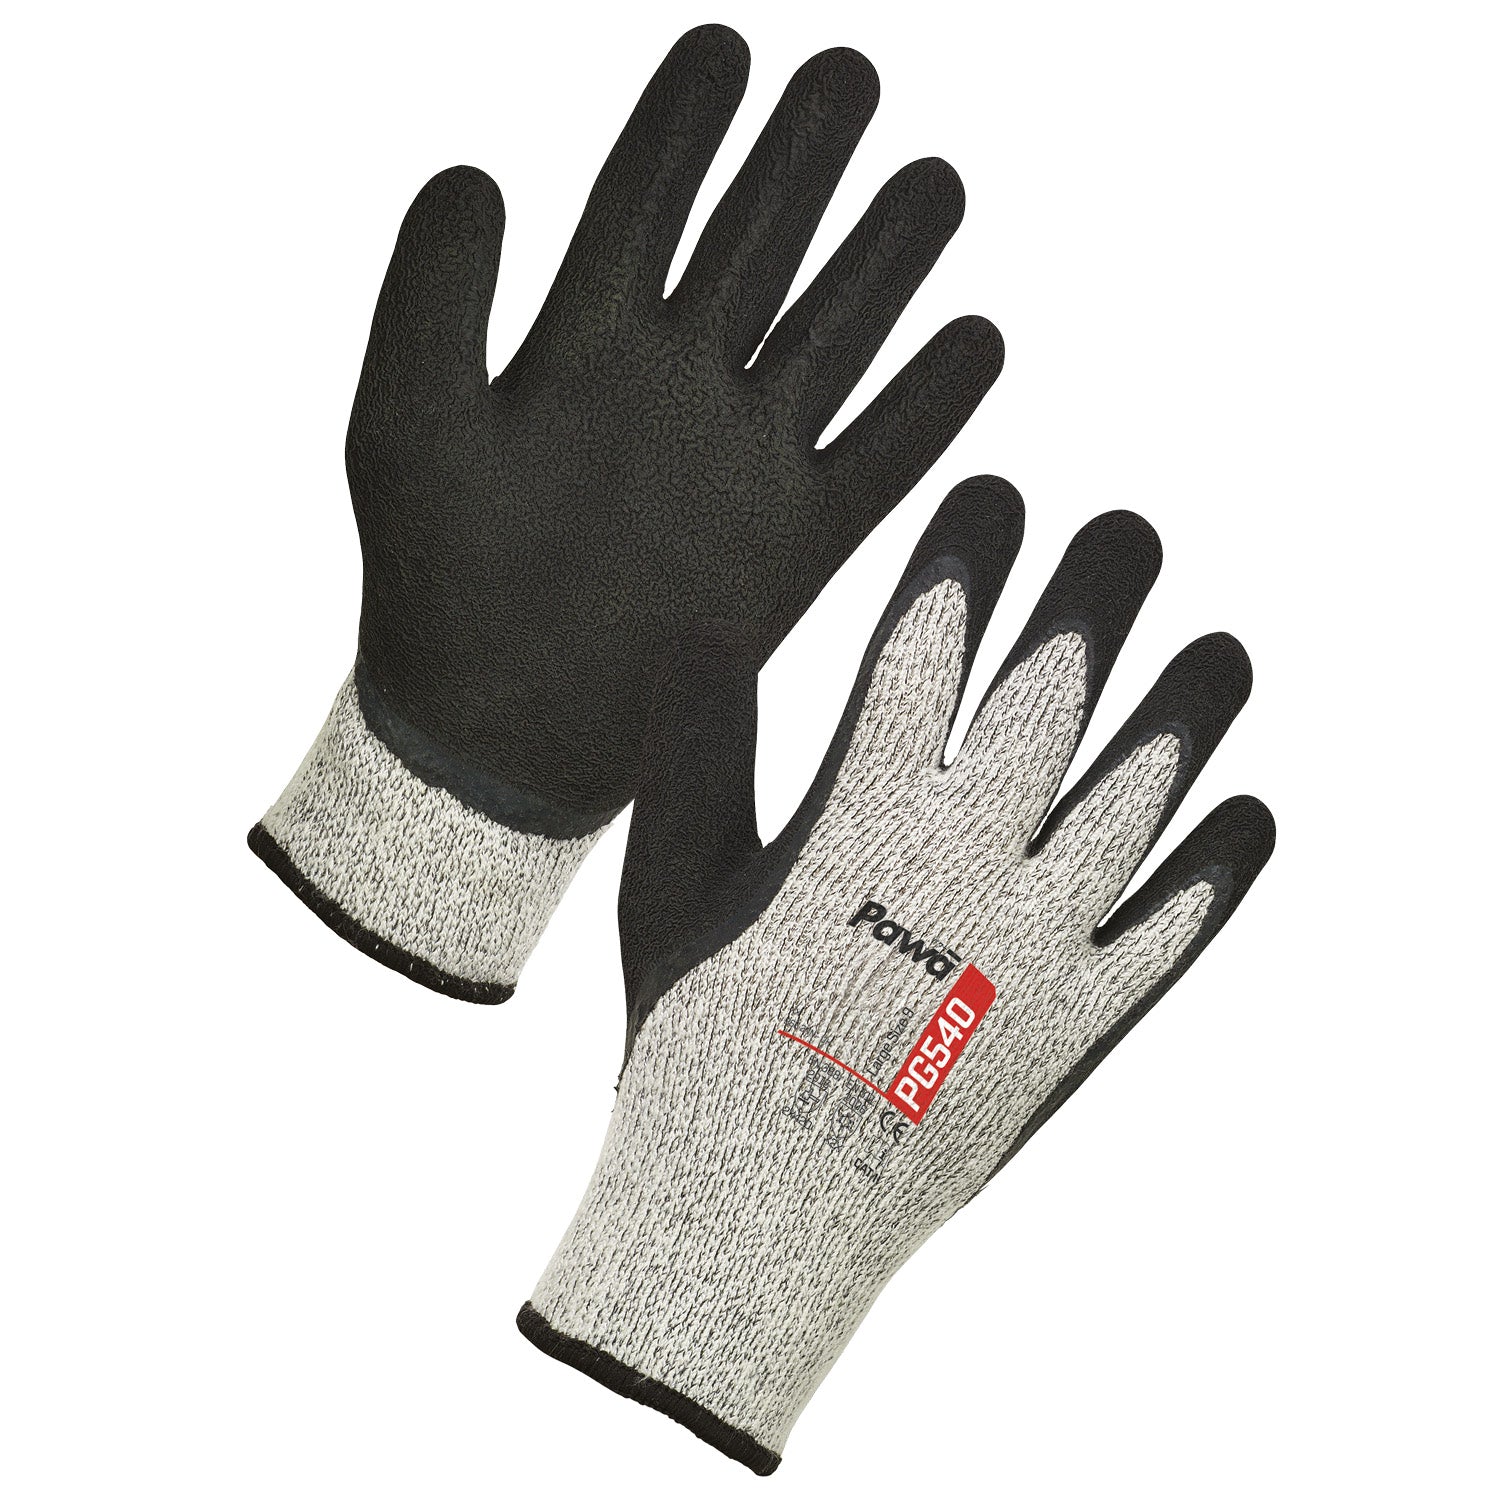 Supertouch Pawa PG540 Gloves